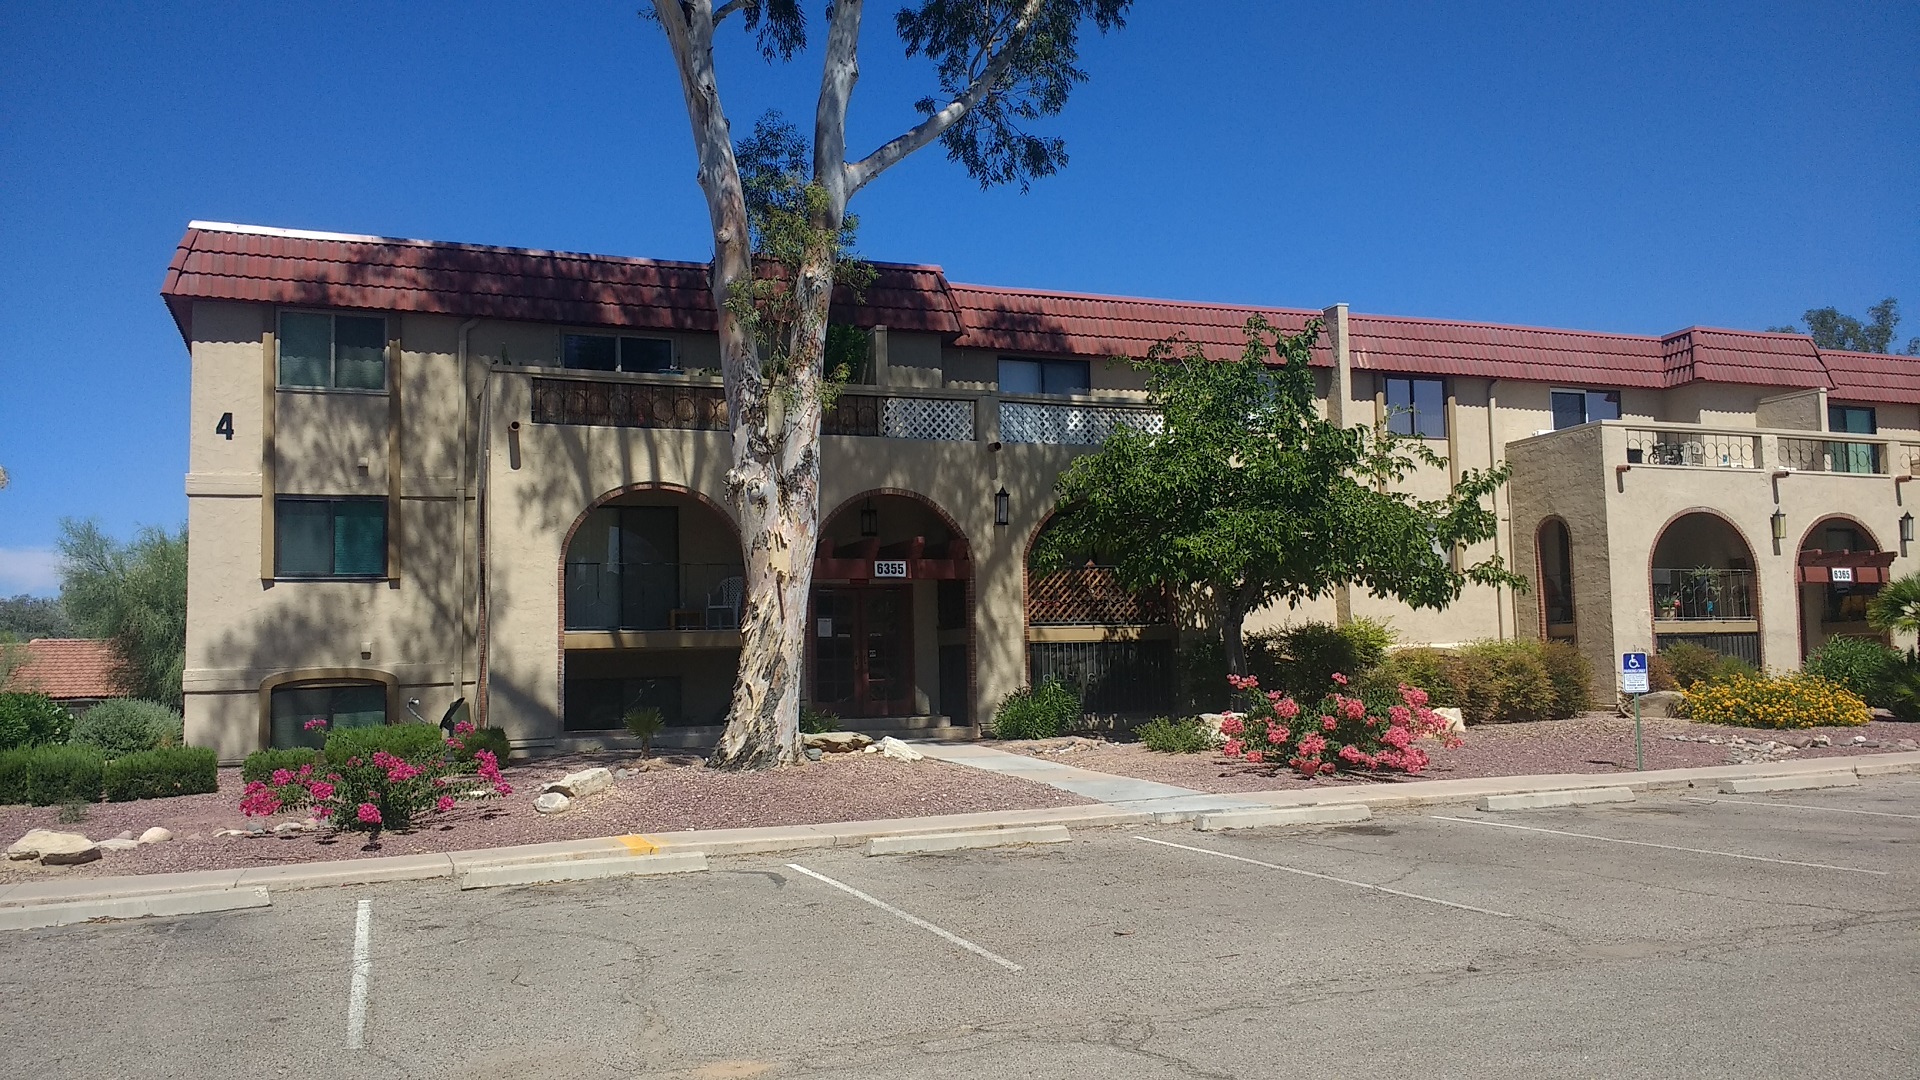 Barcelona Manor, a northwest Tucson condominium built in 1972. A one bedroom unit in this development that sold for $36,400 in 2013 was advertised for $78,000 in 2019 — a 114% increase over six years. Buyers are finding similar changes across the low-cost Tucson real estate market.